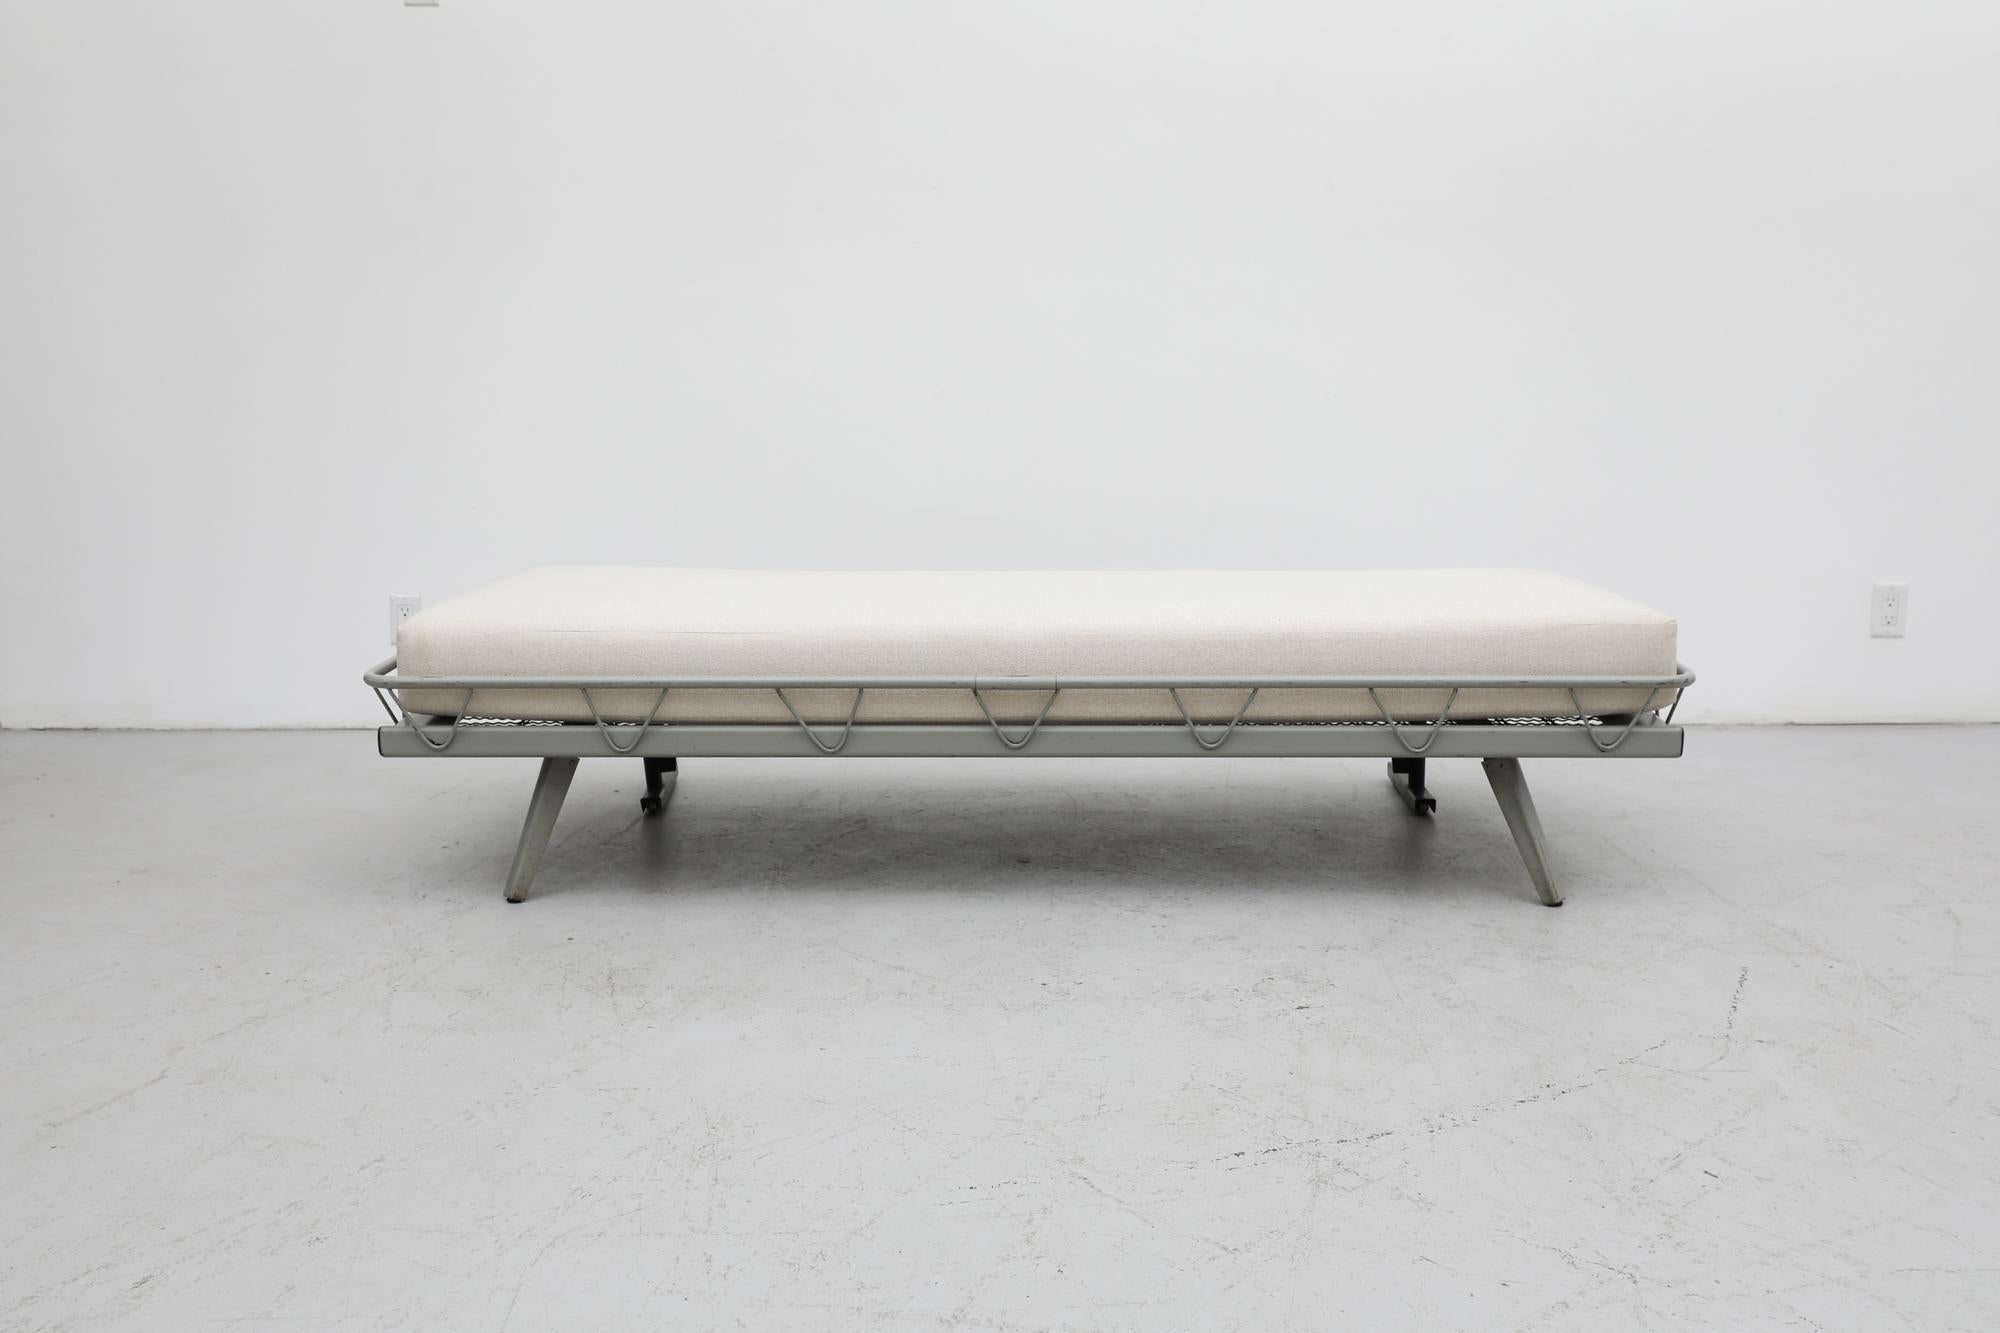 Rare fold-up Arielle daybed by Wim Rietveld for Auping, 1953. The Arielle arrived shortly after Rietveld's 